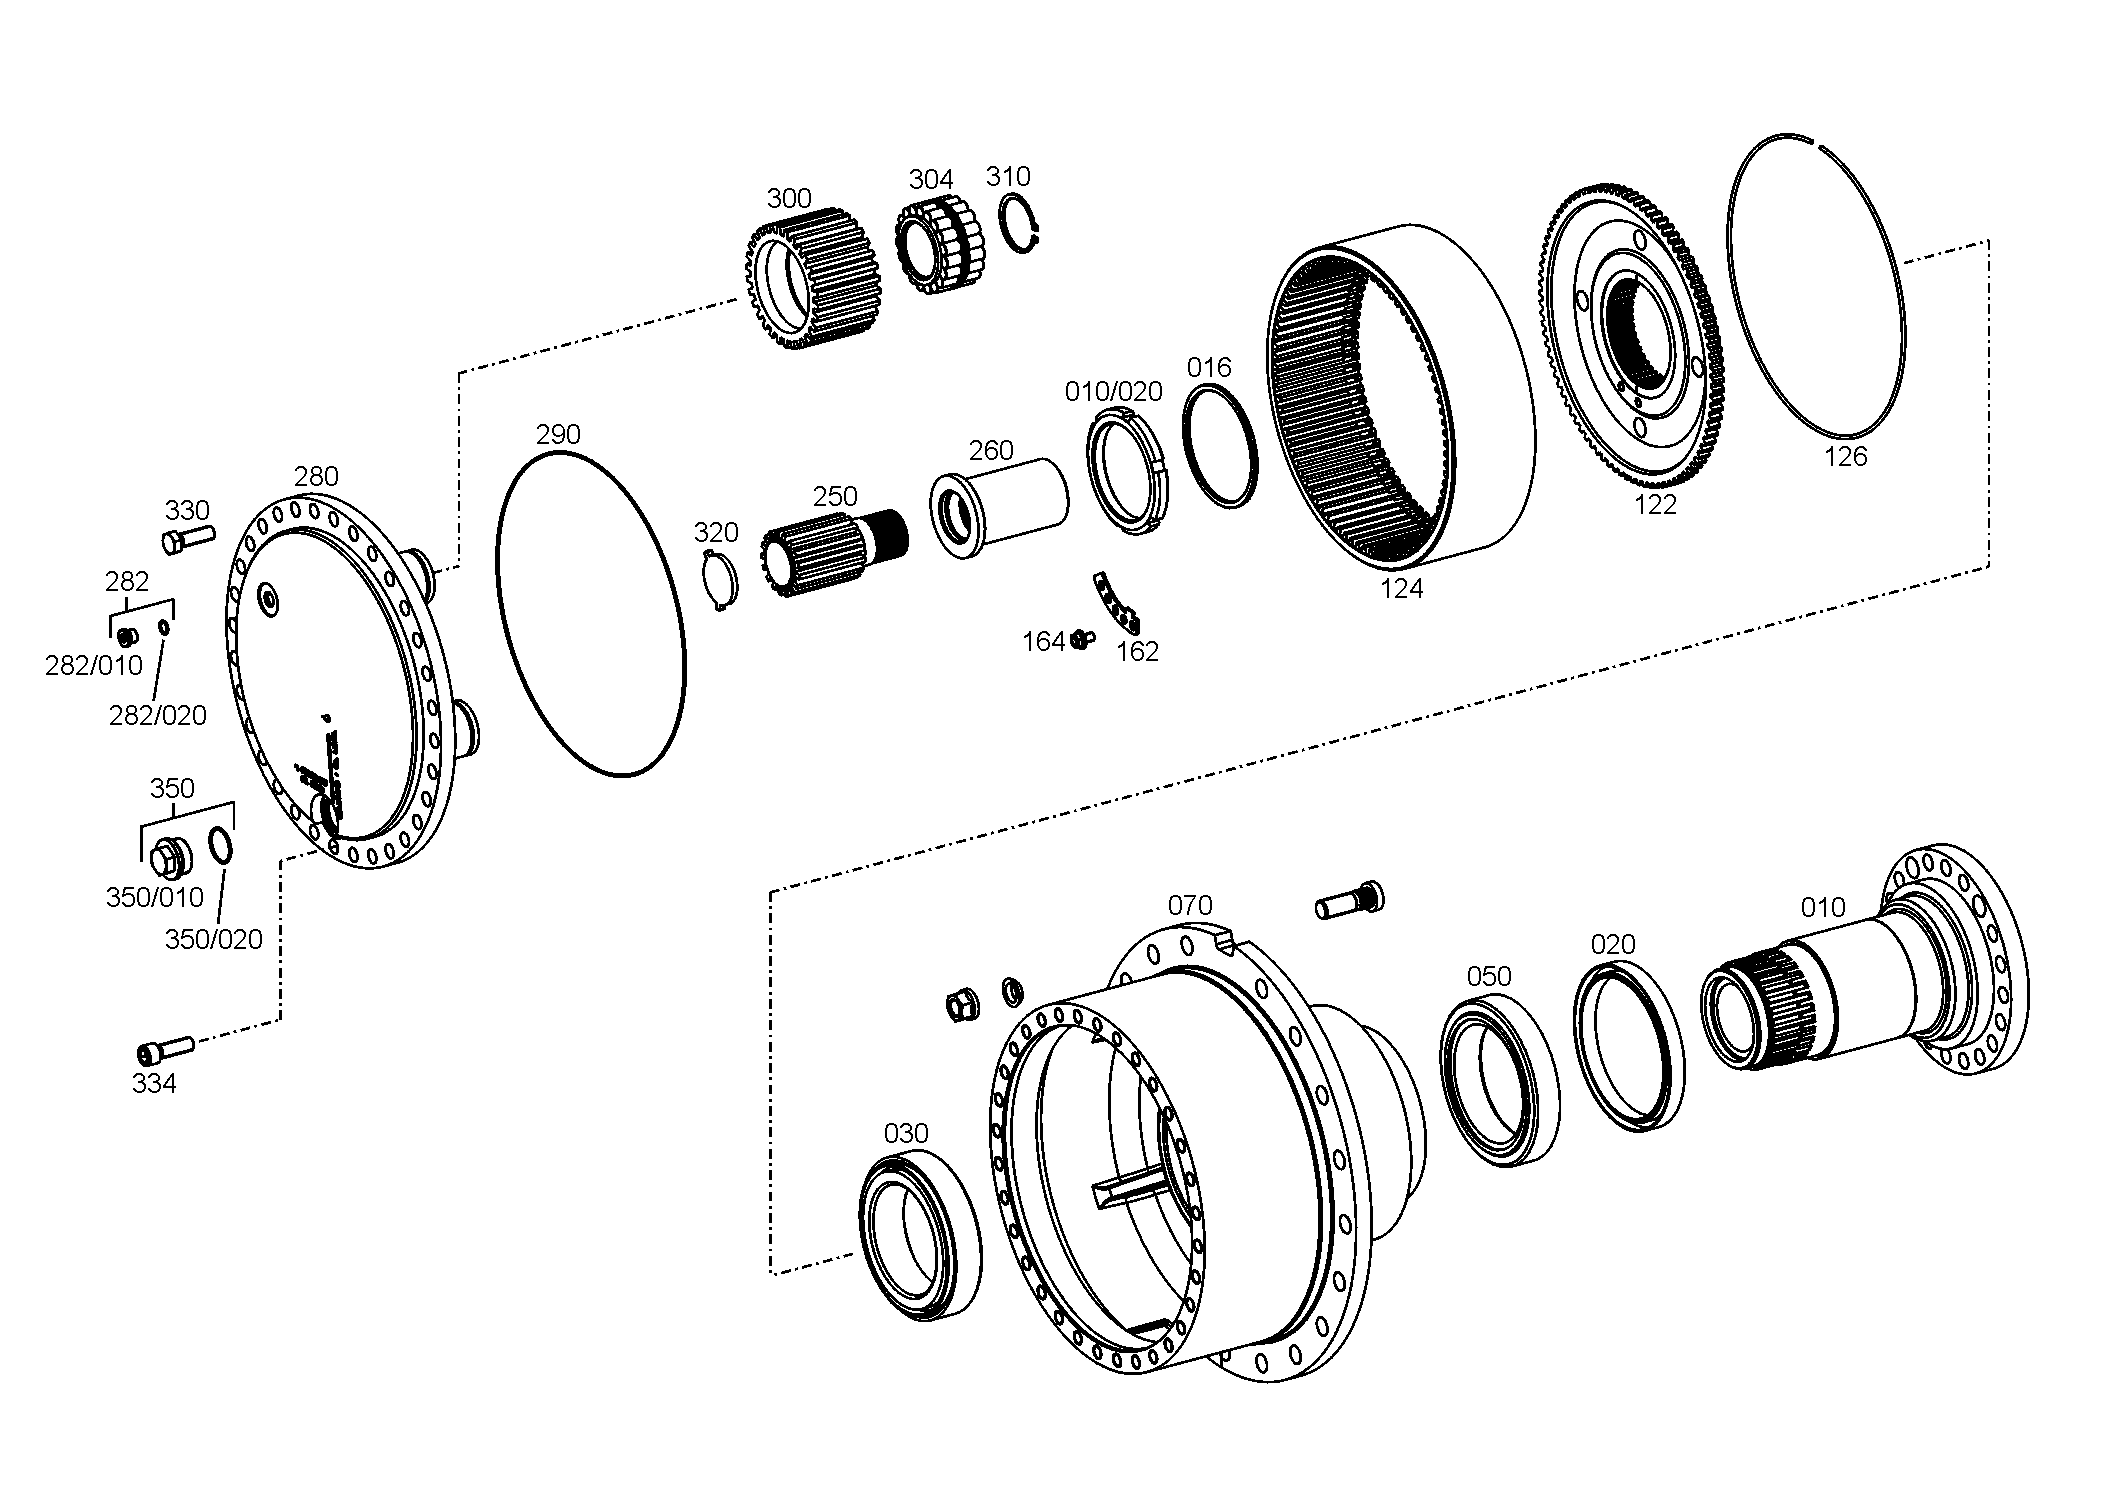 drawing for Astra Veicoli Industriali 0000000134642 - SHAFT SEAL (figure 2)